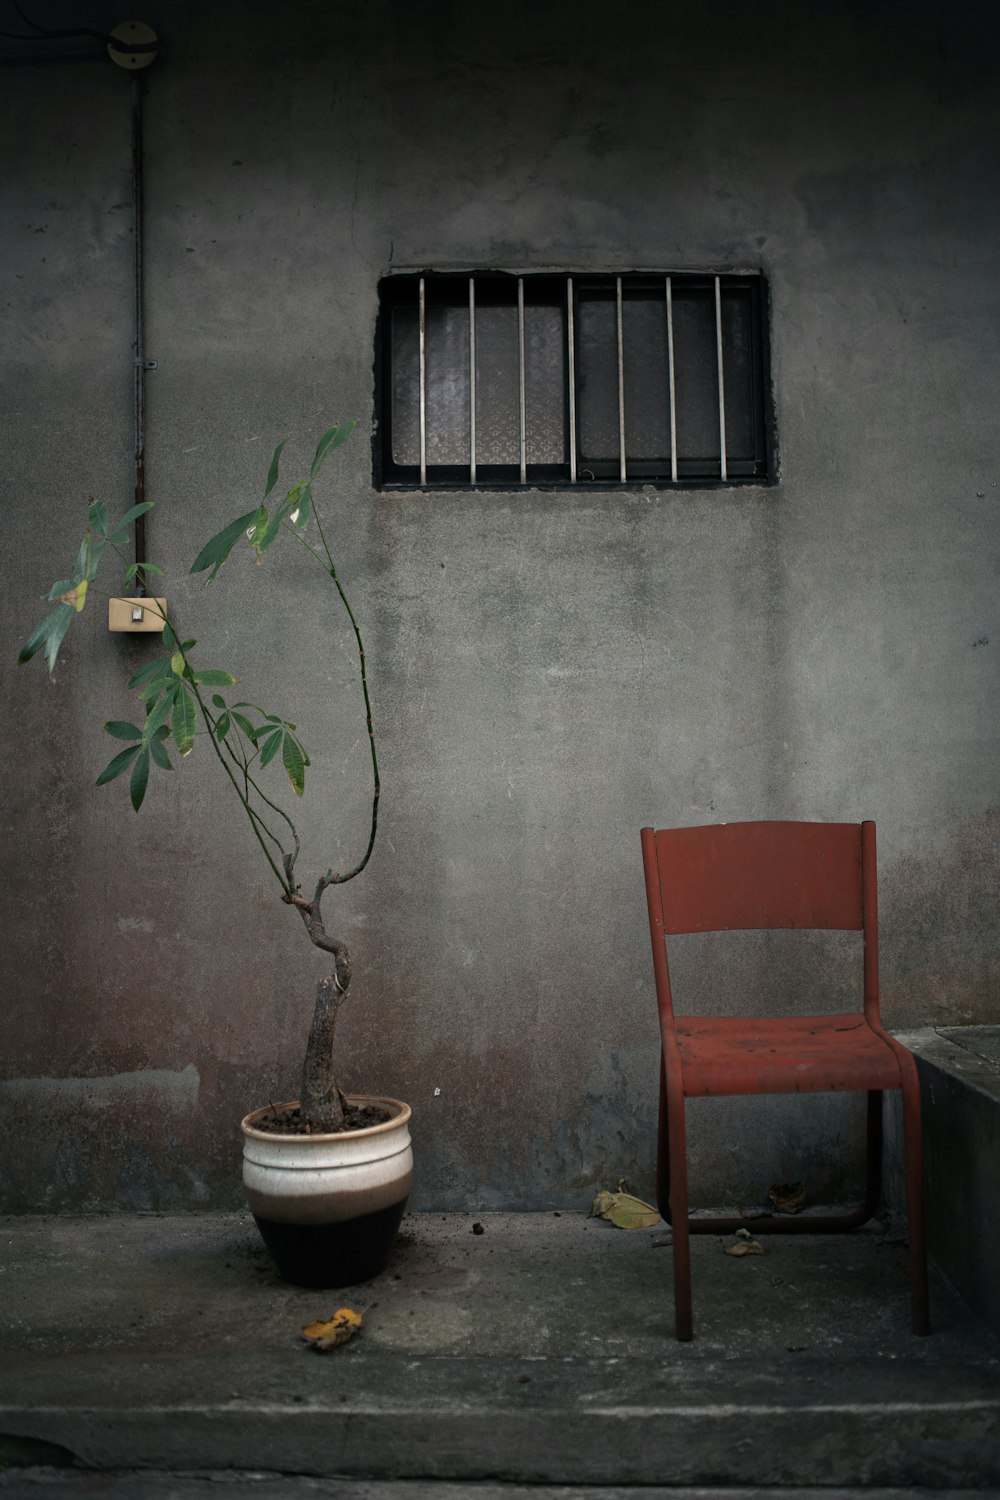 a red chair sitting next to a potted plant